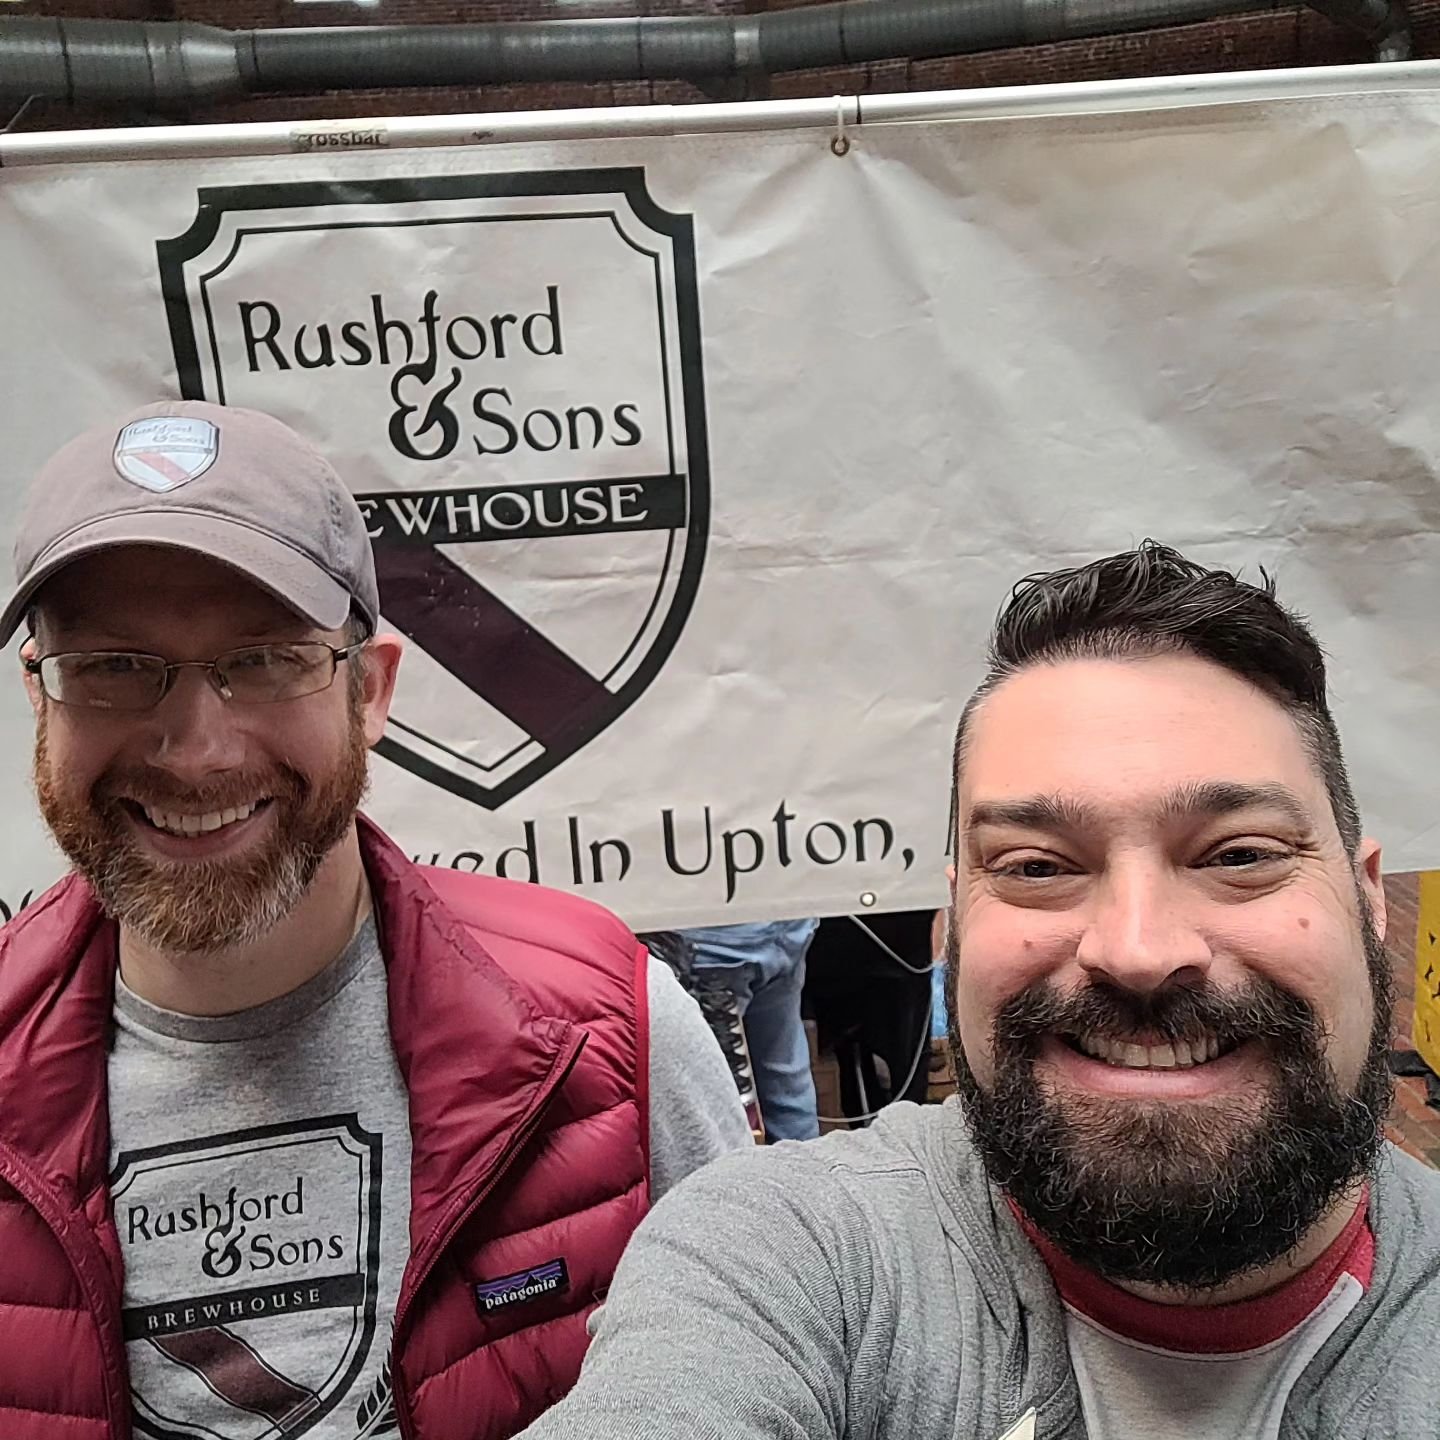 Eric and I are hanging out in Boston at the #mbgfest but we are open in #uptonma all day!  Come say hi in either spot! 

#rasbrewhouse #uptonma #centralma #centralmabeer #beer #brewery #nanobrewery #craftbrewery #craftbeer
#supportlocal #supportloca